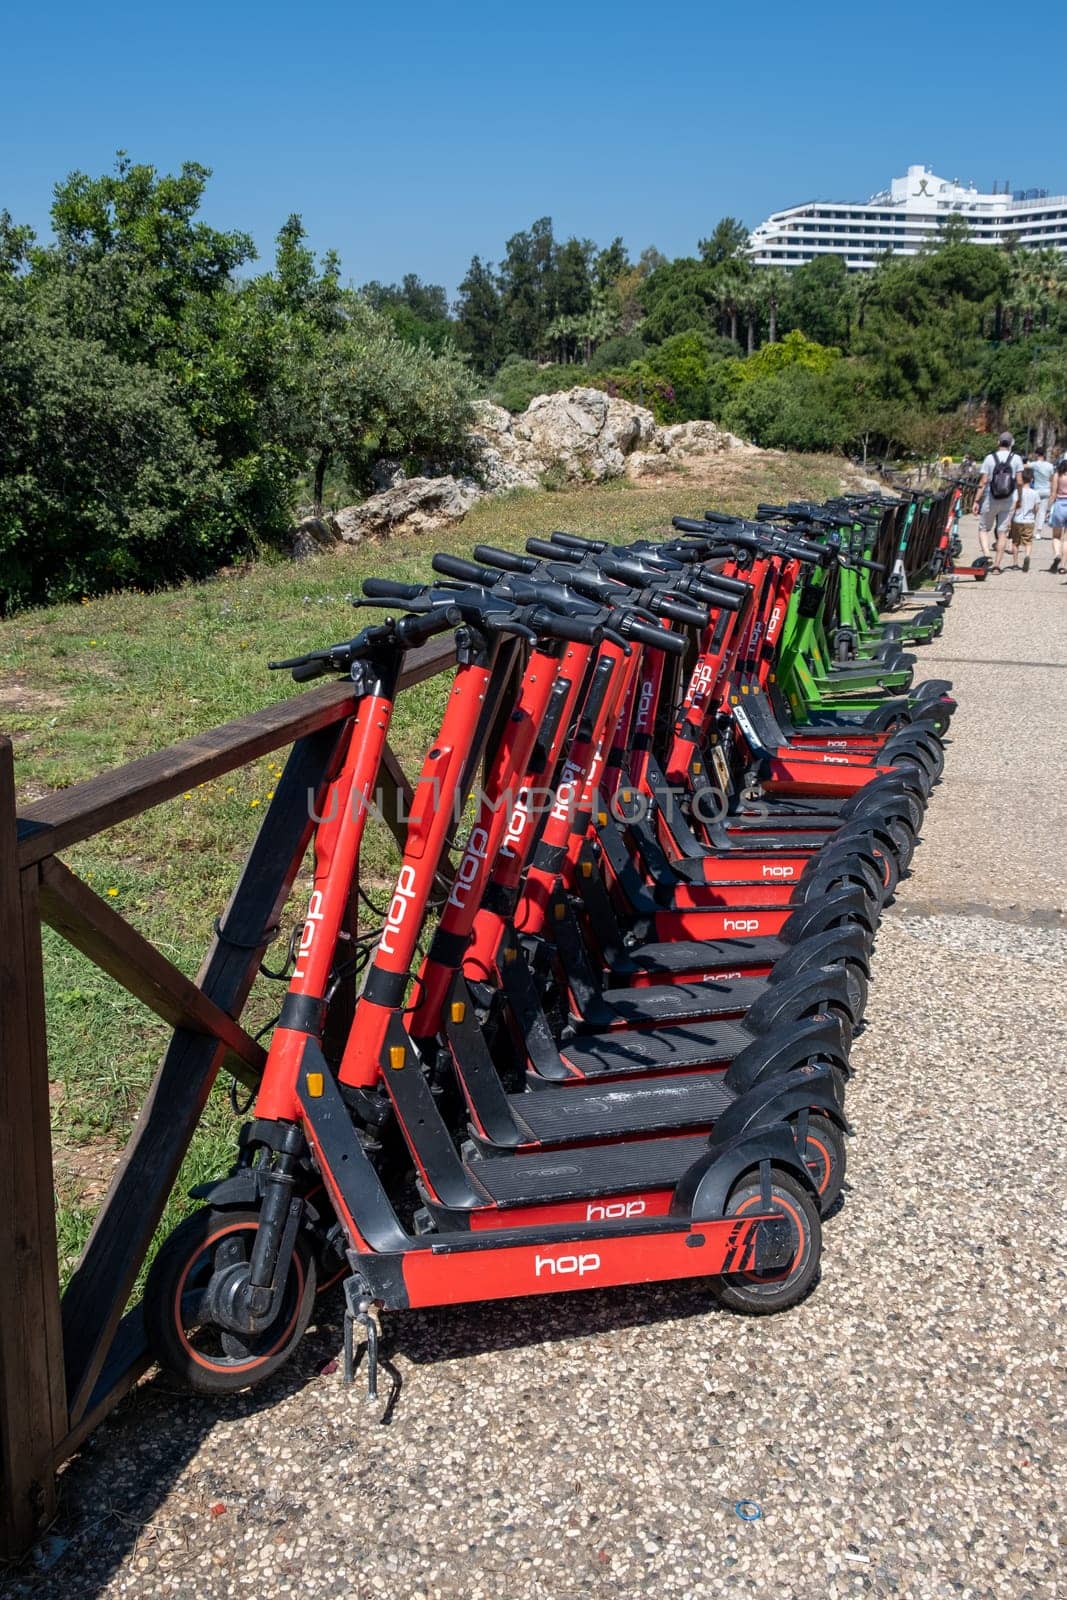 16.06.2023, Antalya, Turkey. Electric scooters for Public Use, Standing on a city street, Public mobile Transport. Electric scooters for rent, for rent An electric scooter is an economical vehicle